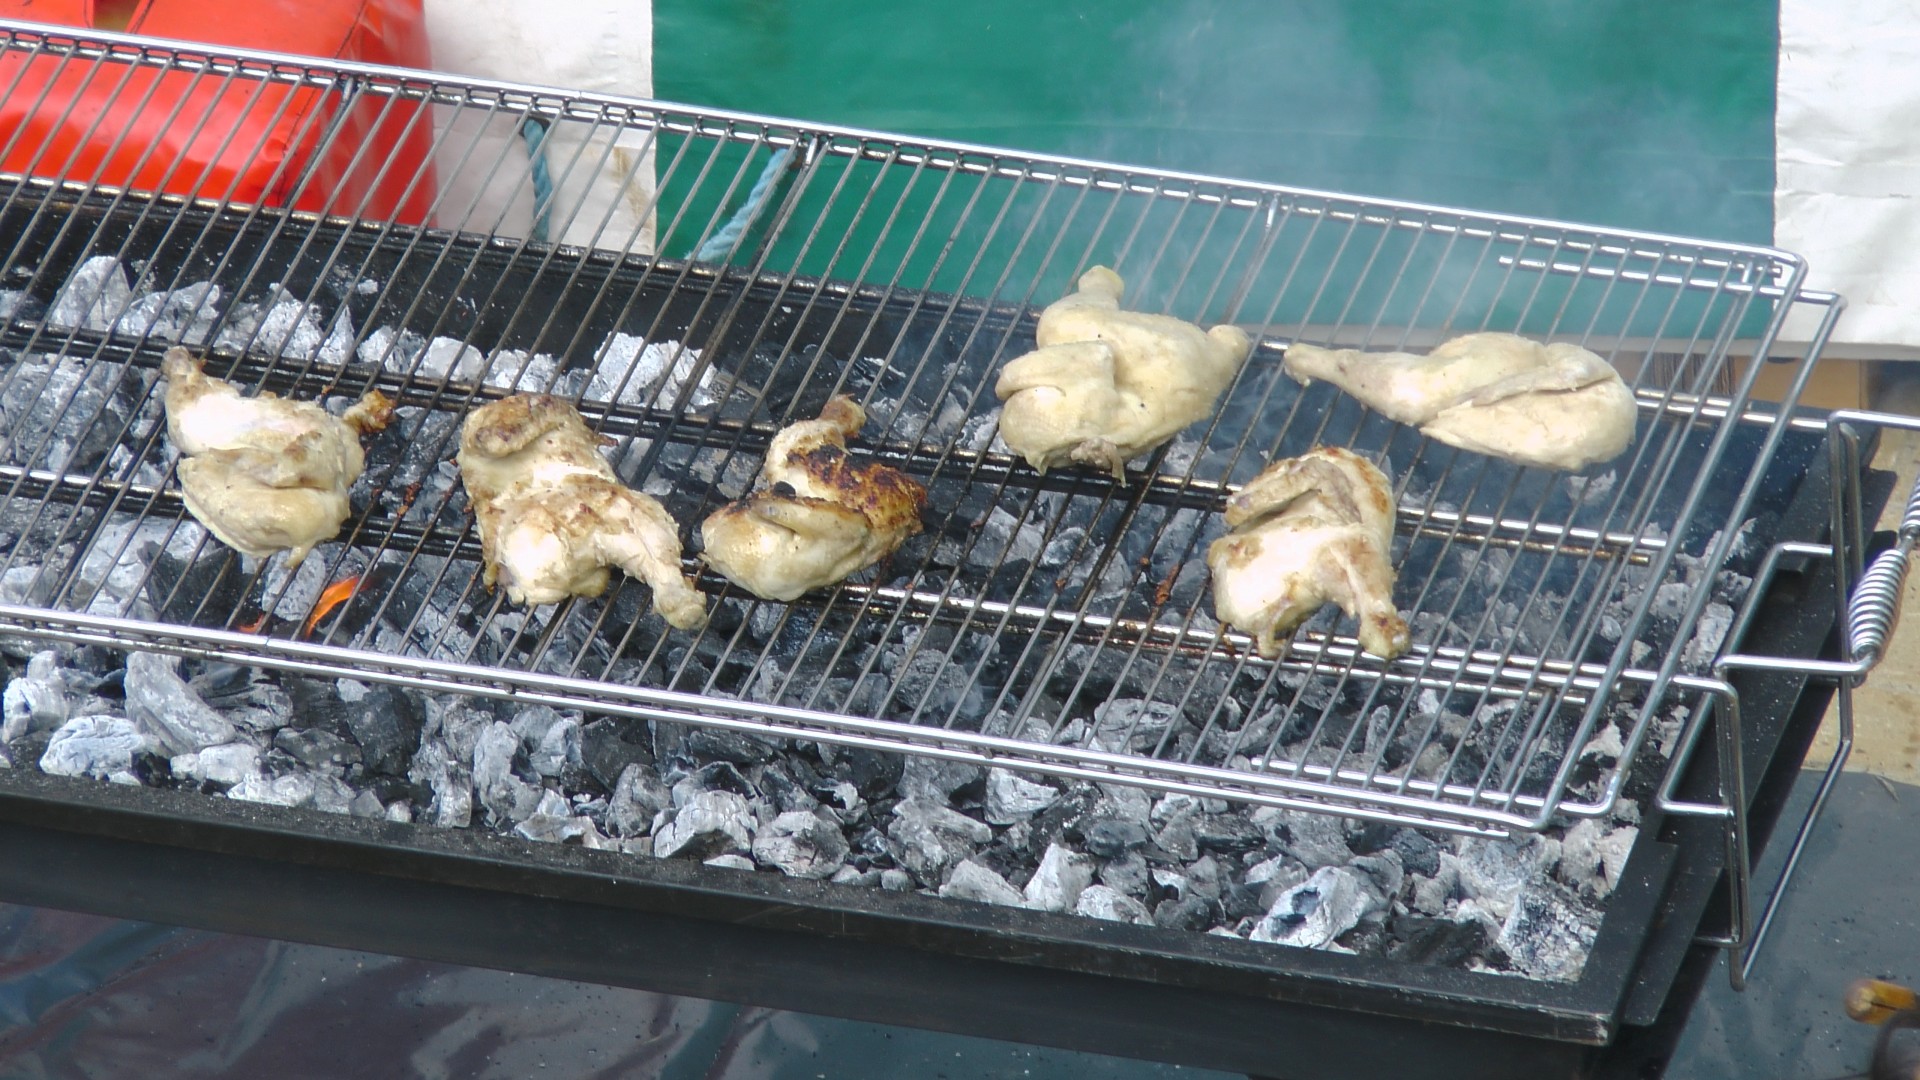 Herbed Barbecued Chicken